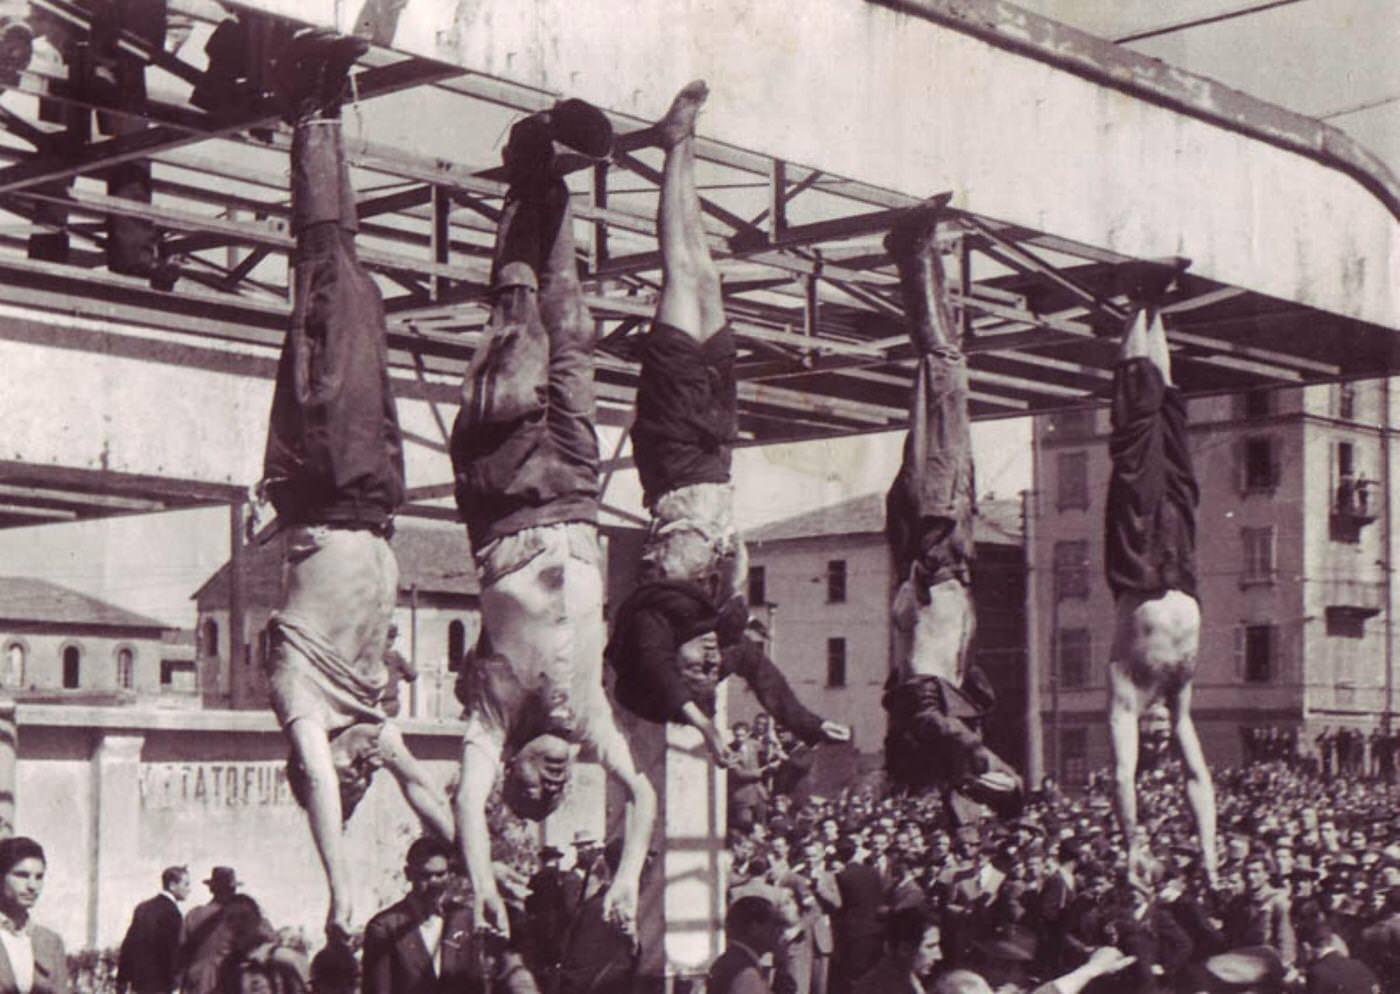 Benito Mussolini and His Mistress Clara Petacci Executed and Displayed in Public Square, 1945